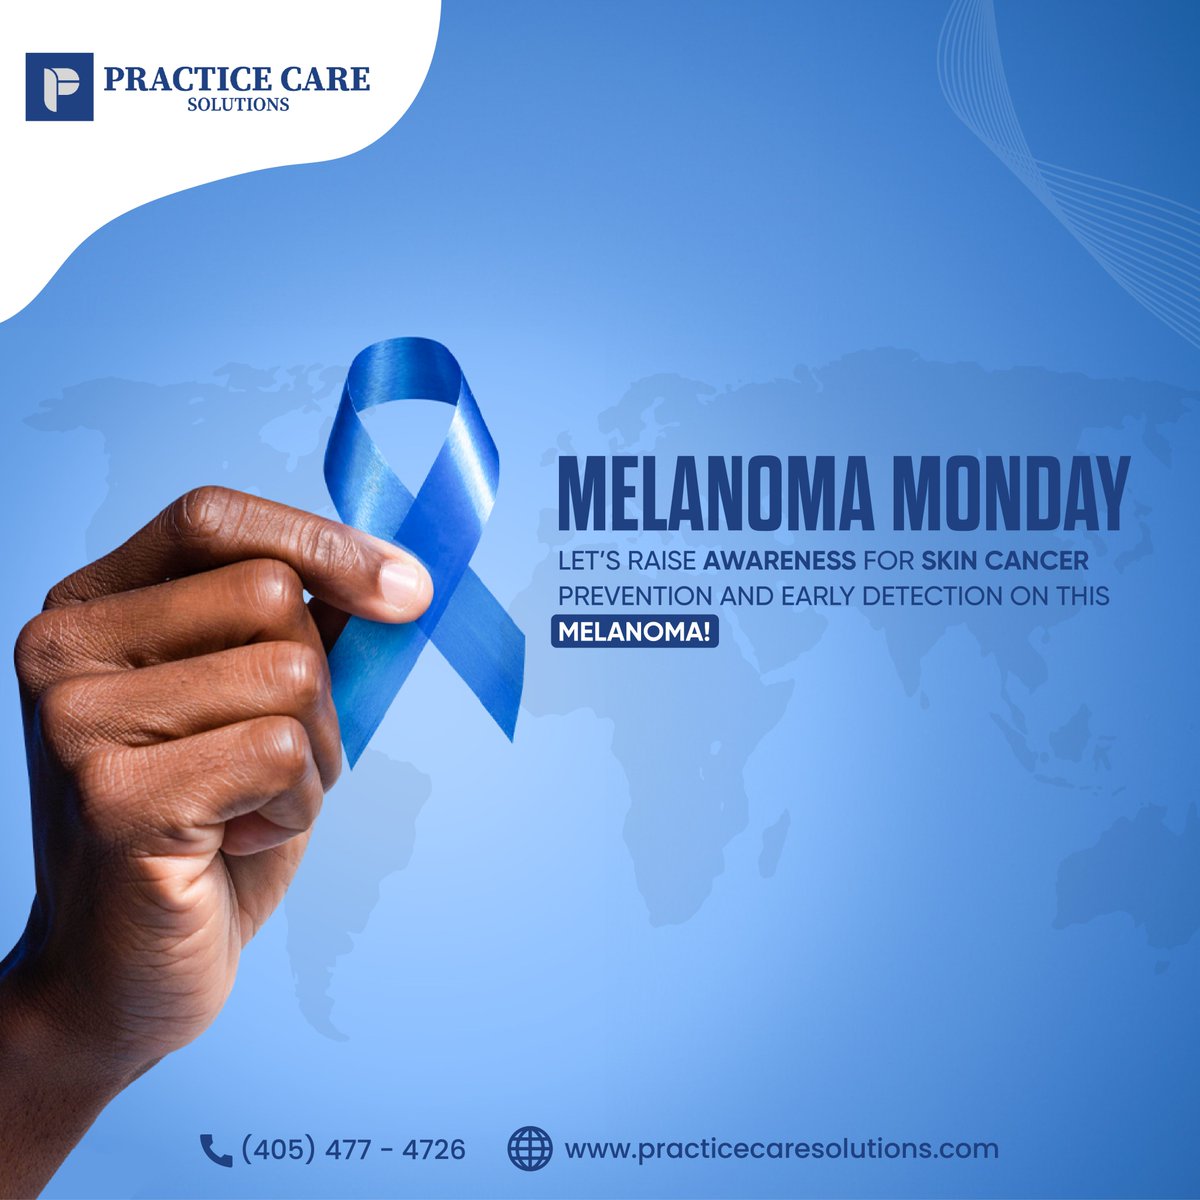 Happy Melanoma Monday! 🎗️ Let's team up to raise awareness for skin cancer prevention and early detection!
At Practice Care, your health is our priority. Take a step towards protecting yourself.
#MelanomaMonday #SkinCancerAwareness #PracticeCare #SkinHealth